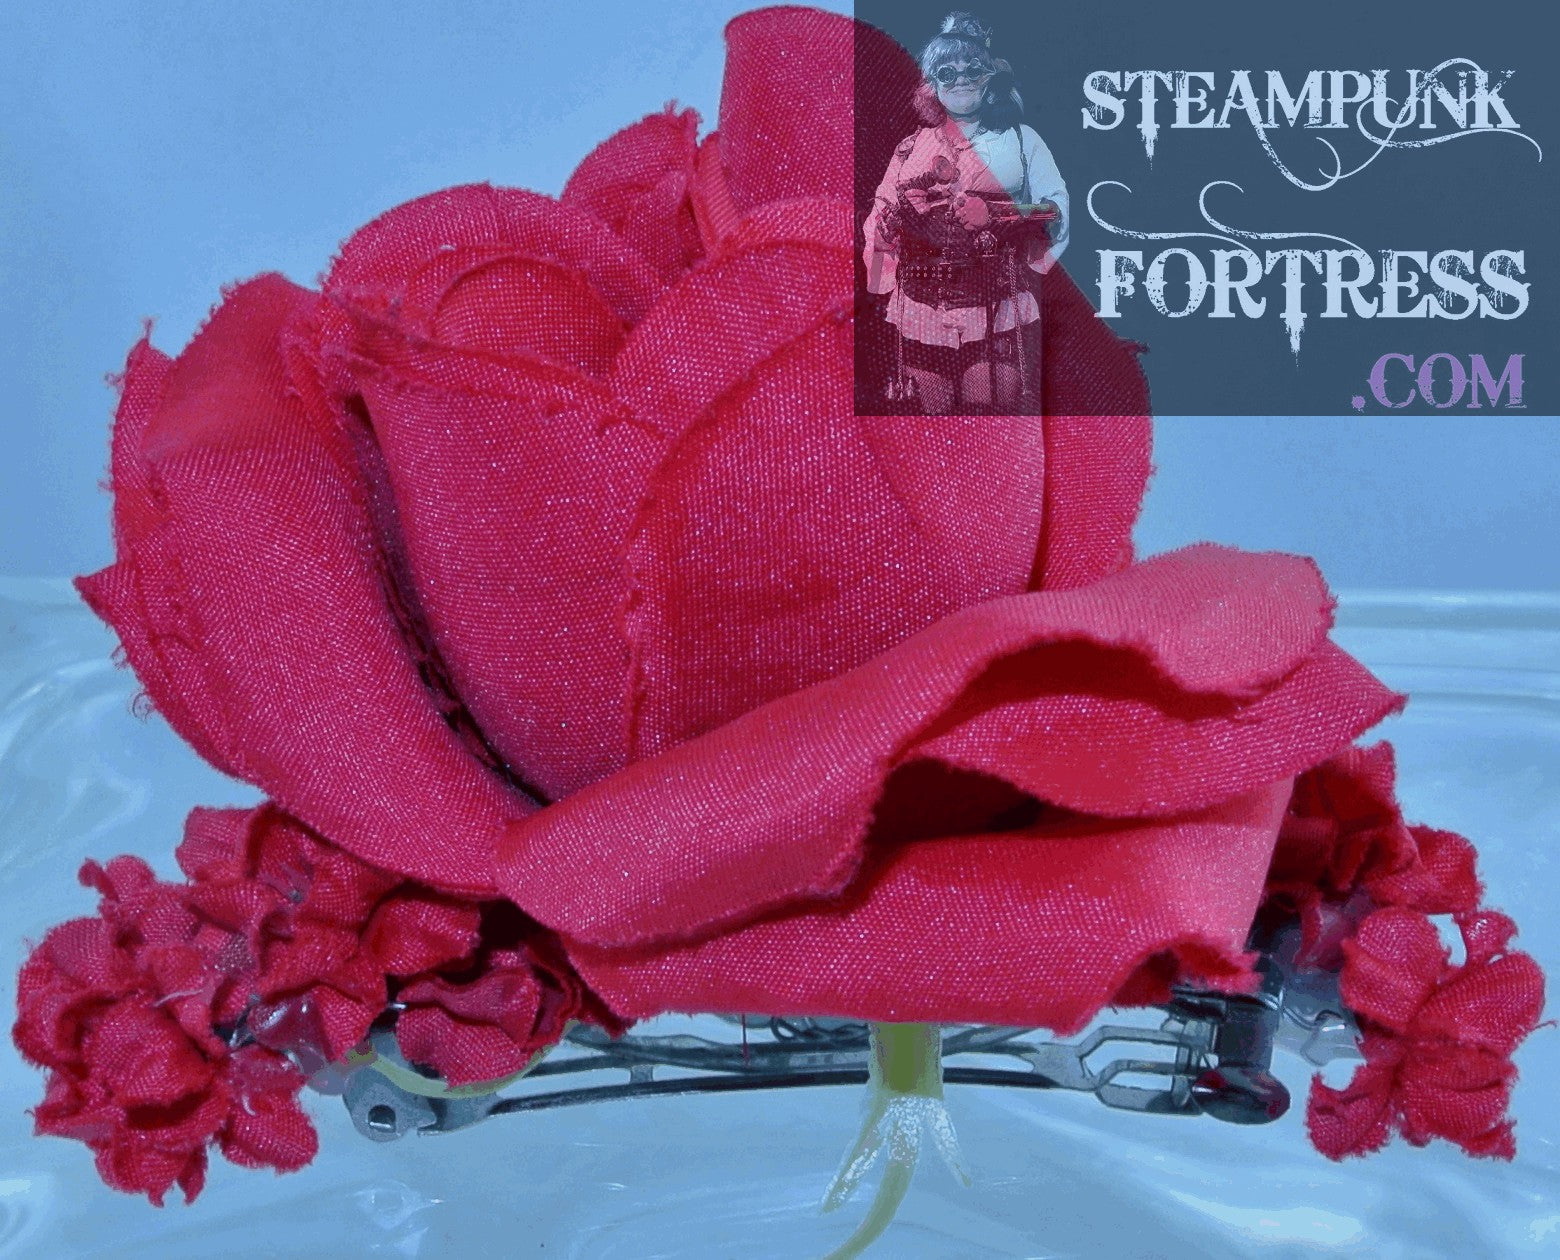 BARRETTE SILVER ROSE RED SMALL FLOWERS HAIR CLIP STARR WILDE STEAMPUNK FORTRESS